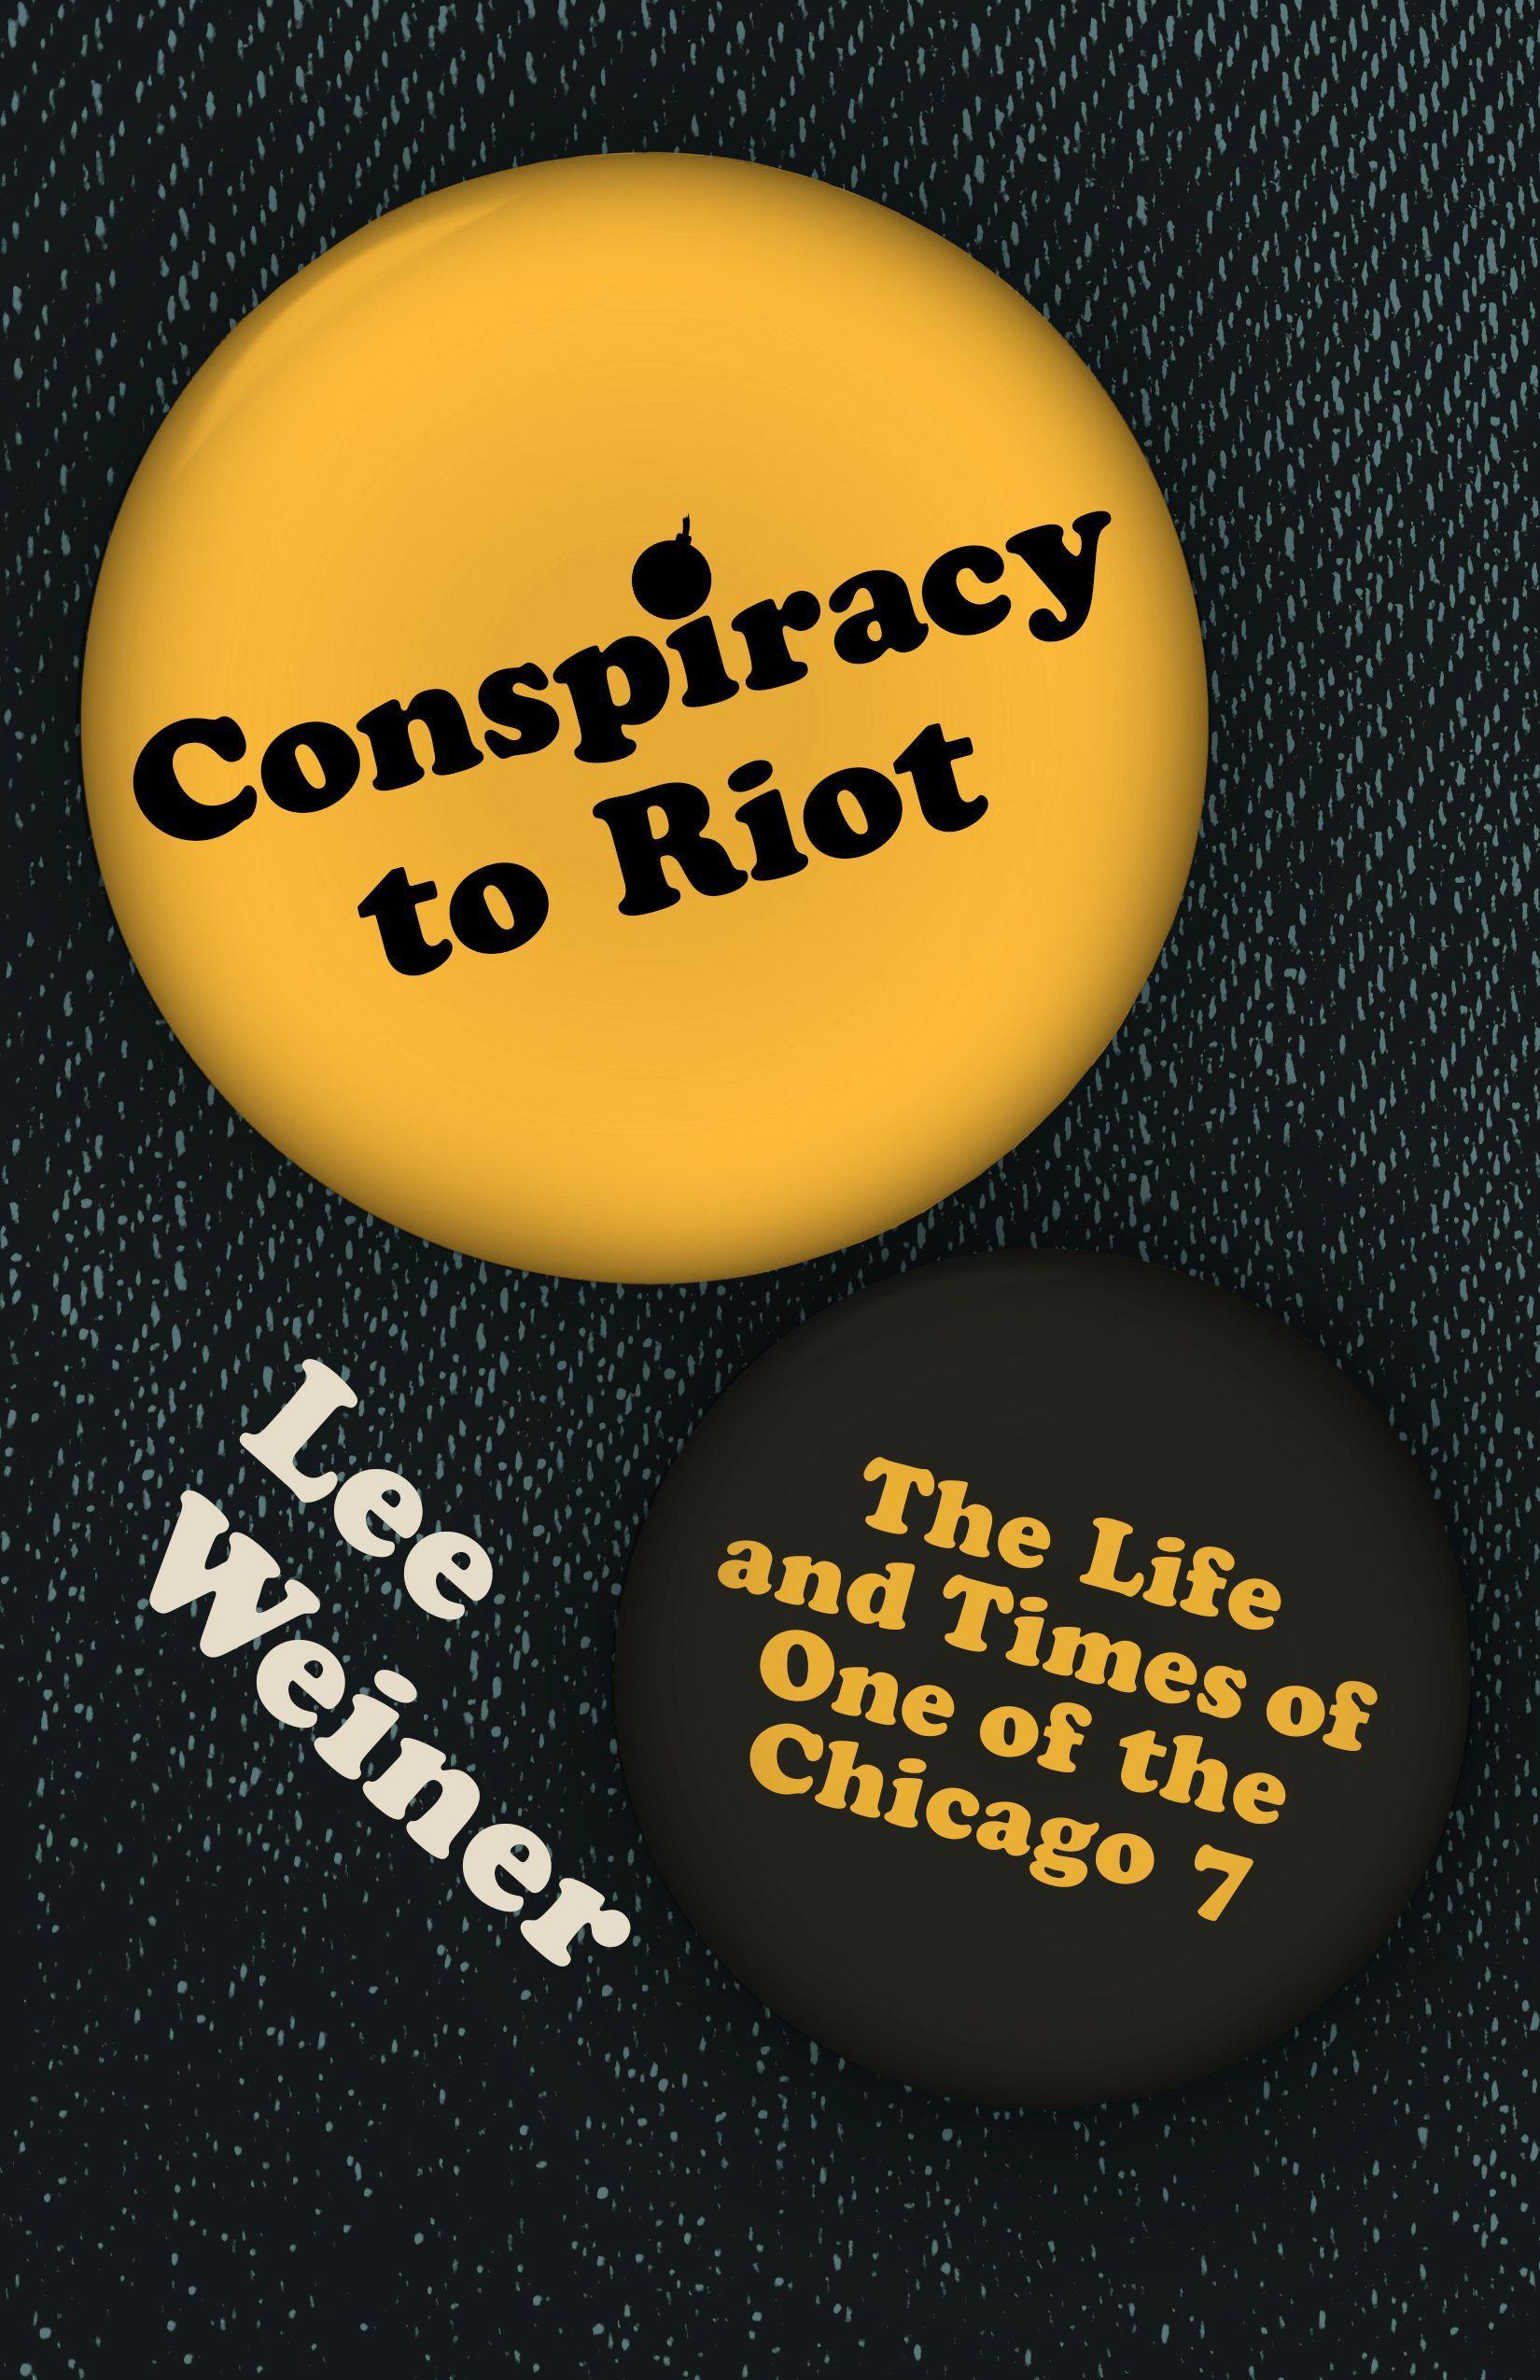 Conspiracy to Riot: The Life and Times of One of the Chicago 7  Lee Weiner  Buch  Englisch  2020  BELT PUB  EAN 9781948742689 - Weiner, Lee